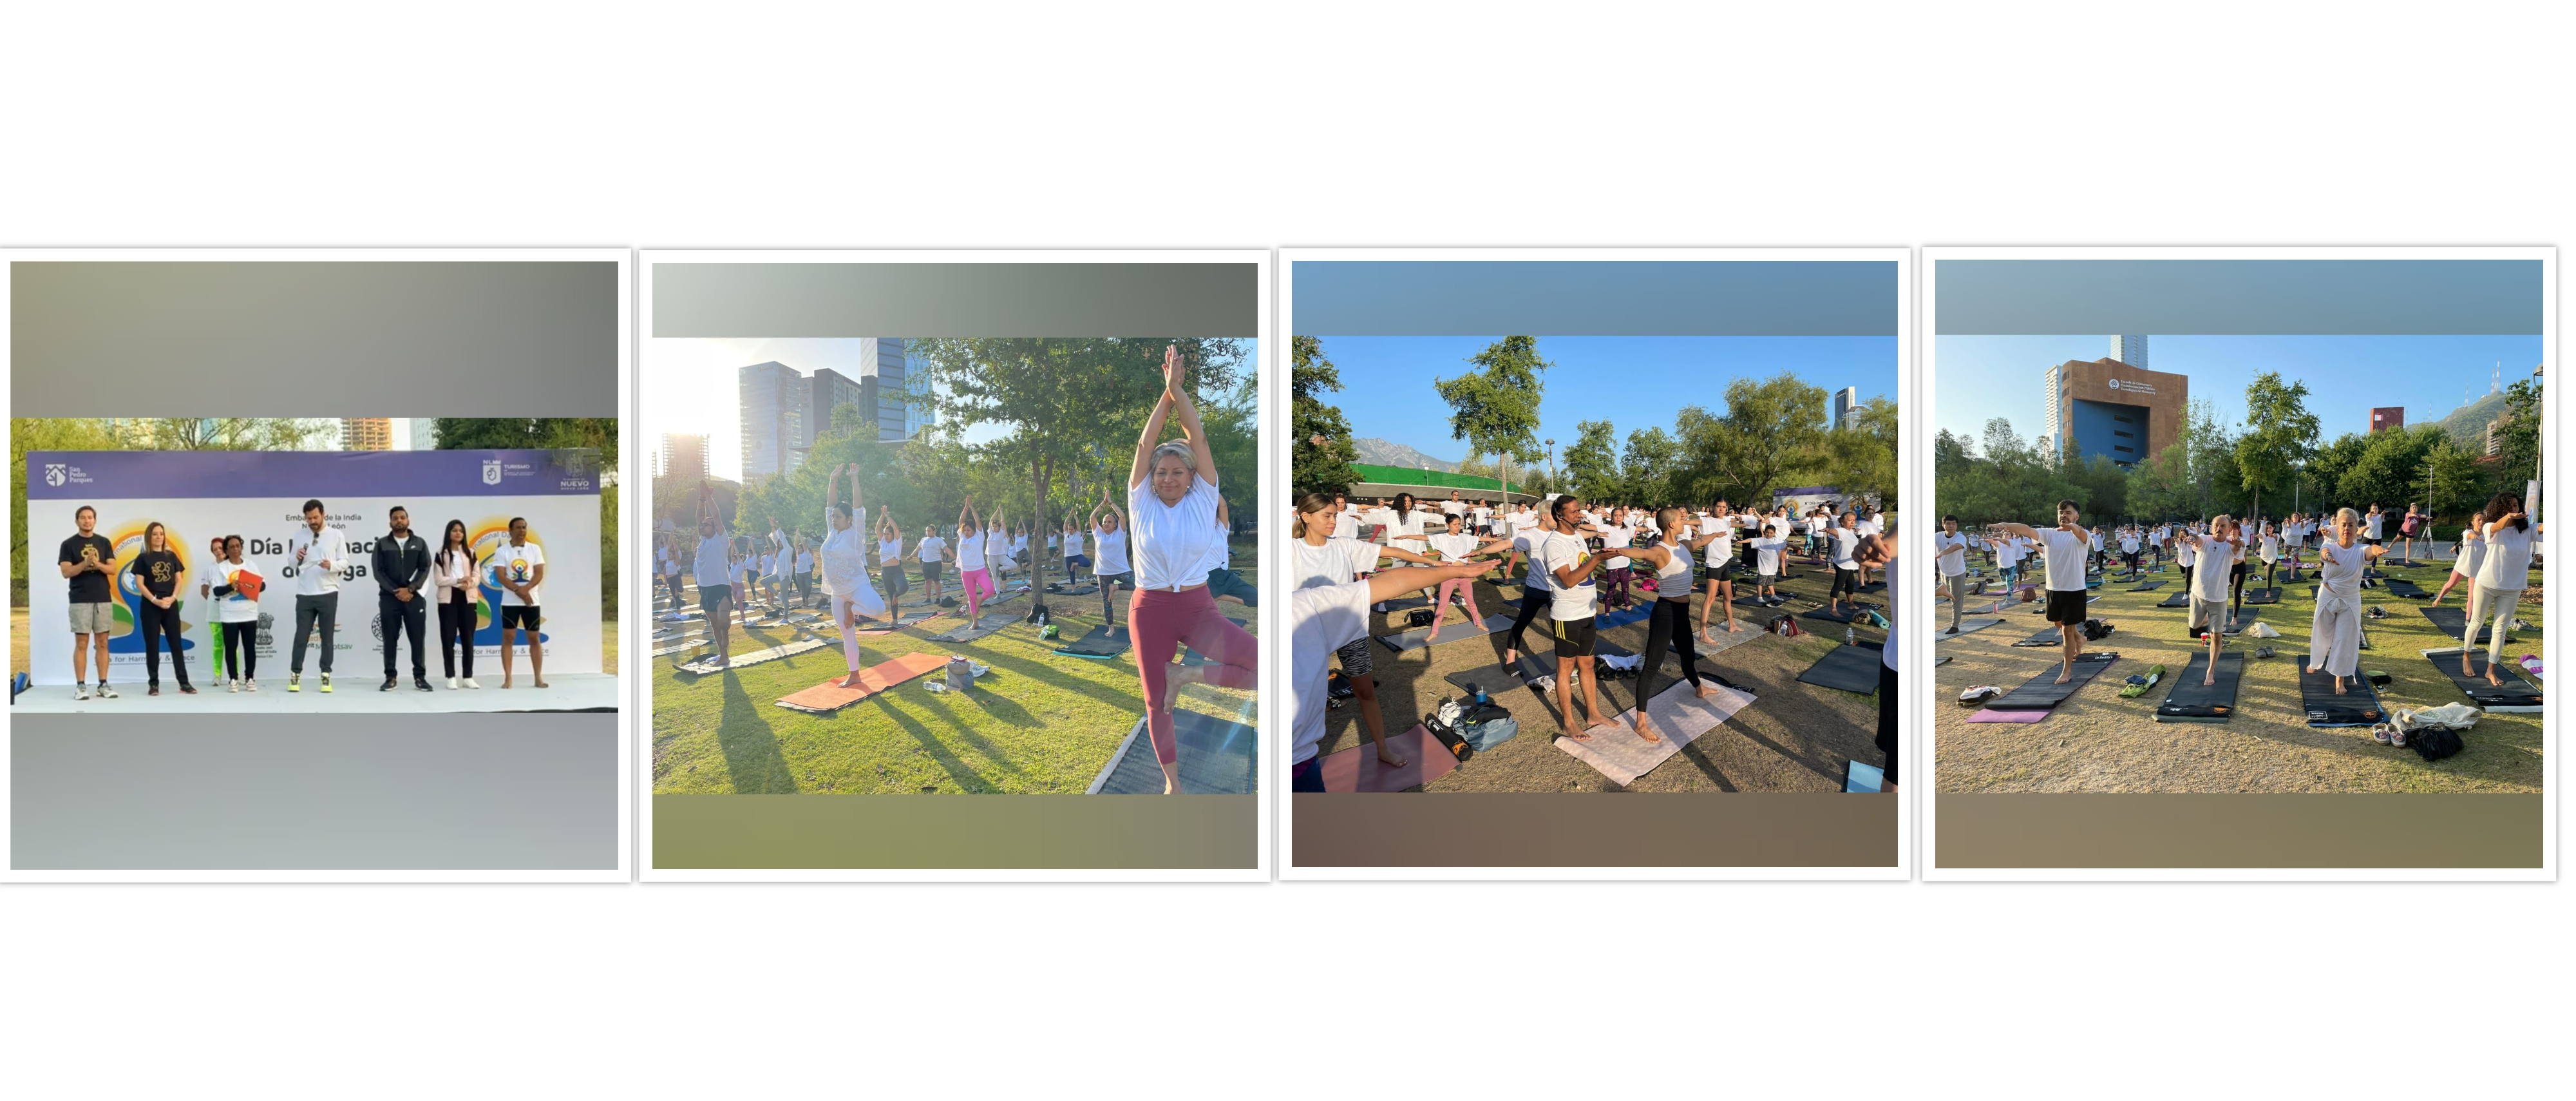  <div style="fcolor: #fff; font-weight: 600; font-size: 1.5em;">
<p style="font-size: 13.8px;">International Day of Yoga 2022!

There is always time for yoga and yoga enthusiasts from city of Monterrey showed this as they turned up in huge numbers early morning for the yoga practice.

<br /><span style="text-align: center;">24 June 2022</span></p>
</div>

